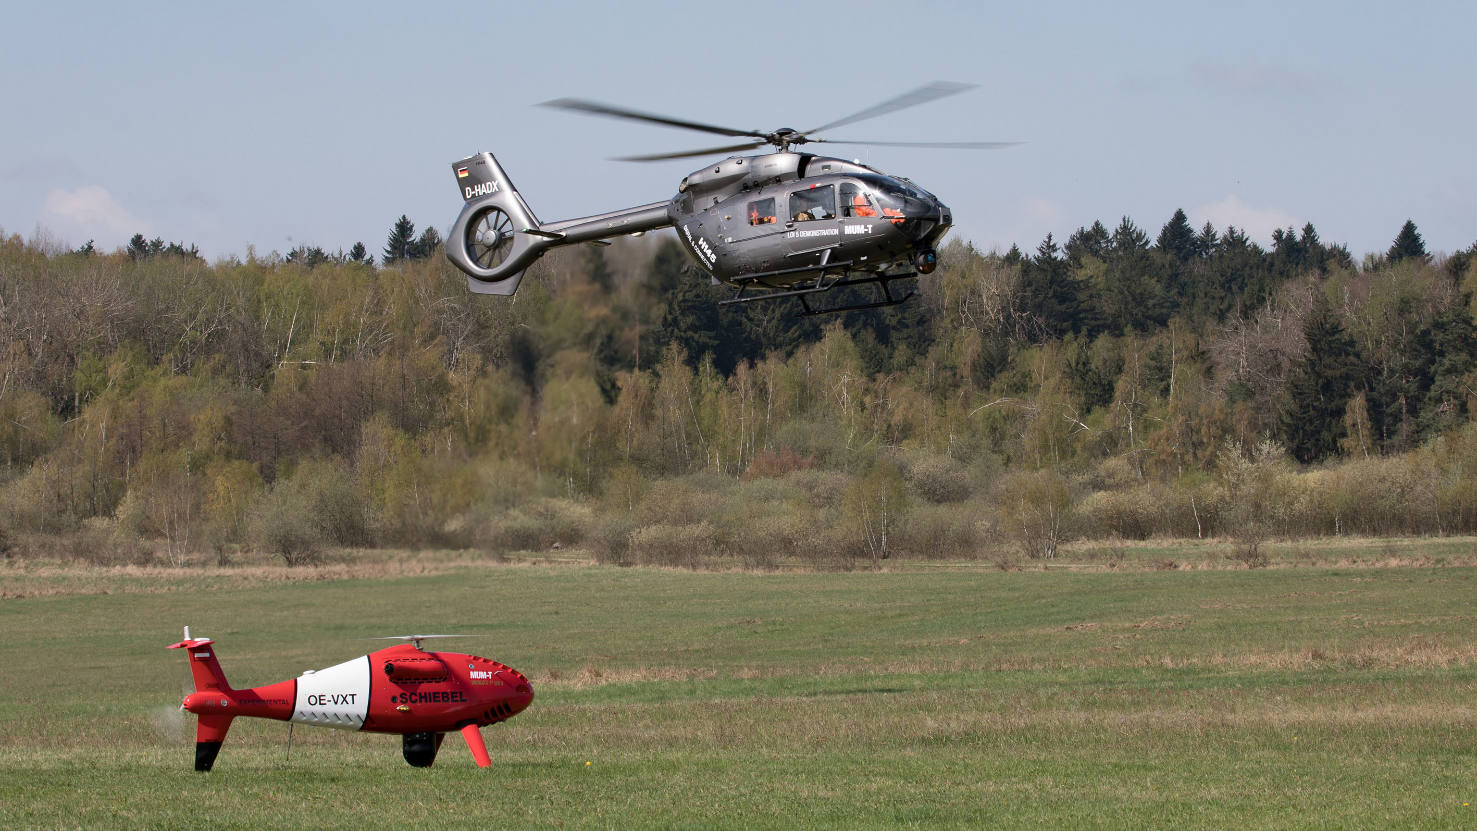 Airbus, Schiebel explore manned-unmanned teaming